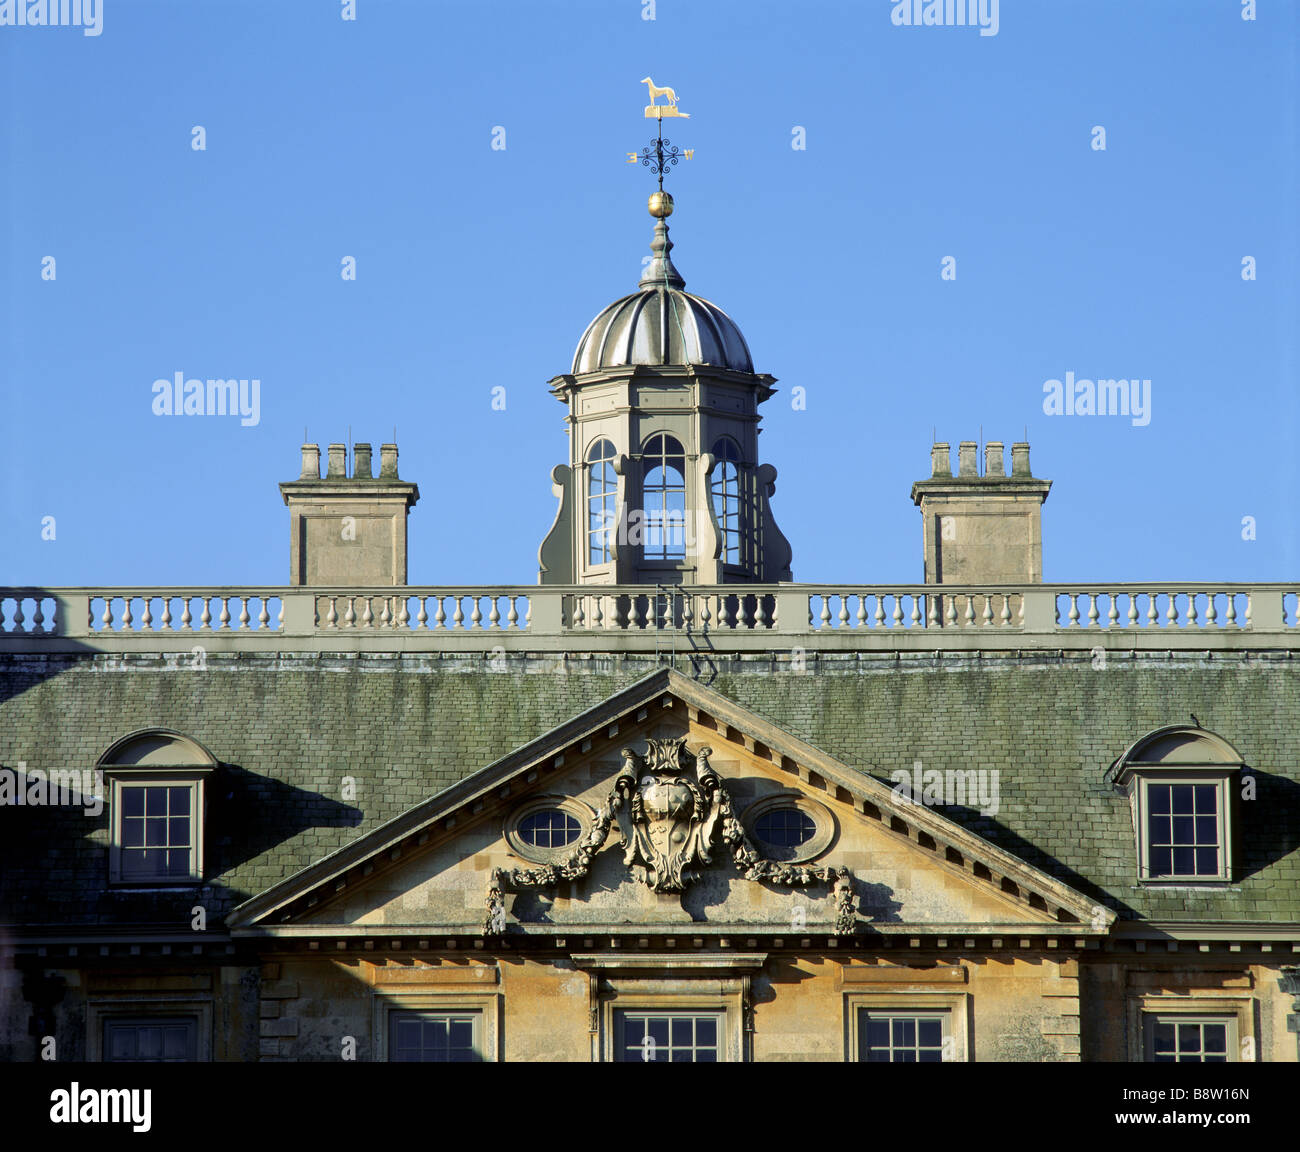 A close view of part of the North front of Belton House showing coat of arms and the cupola Stock Photo